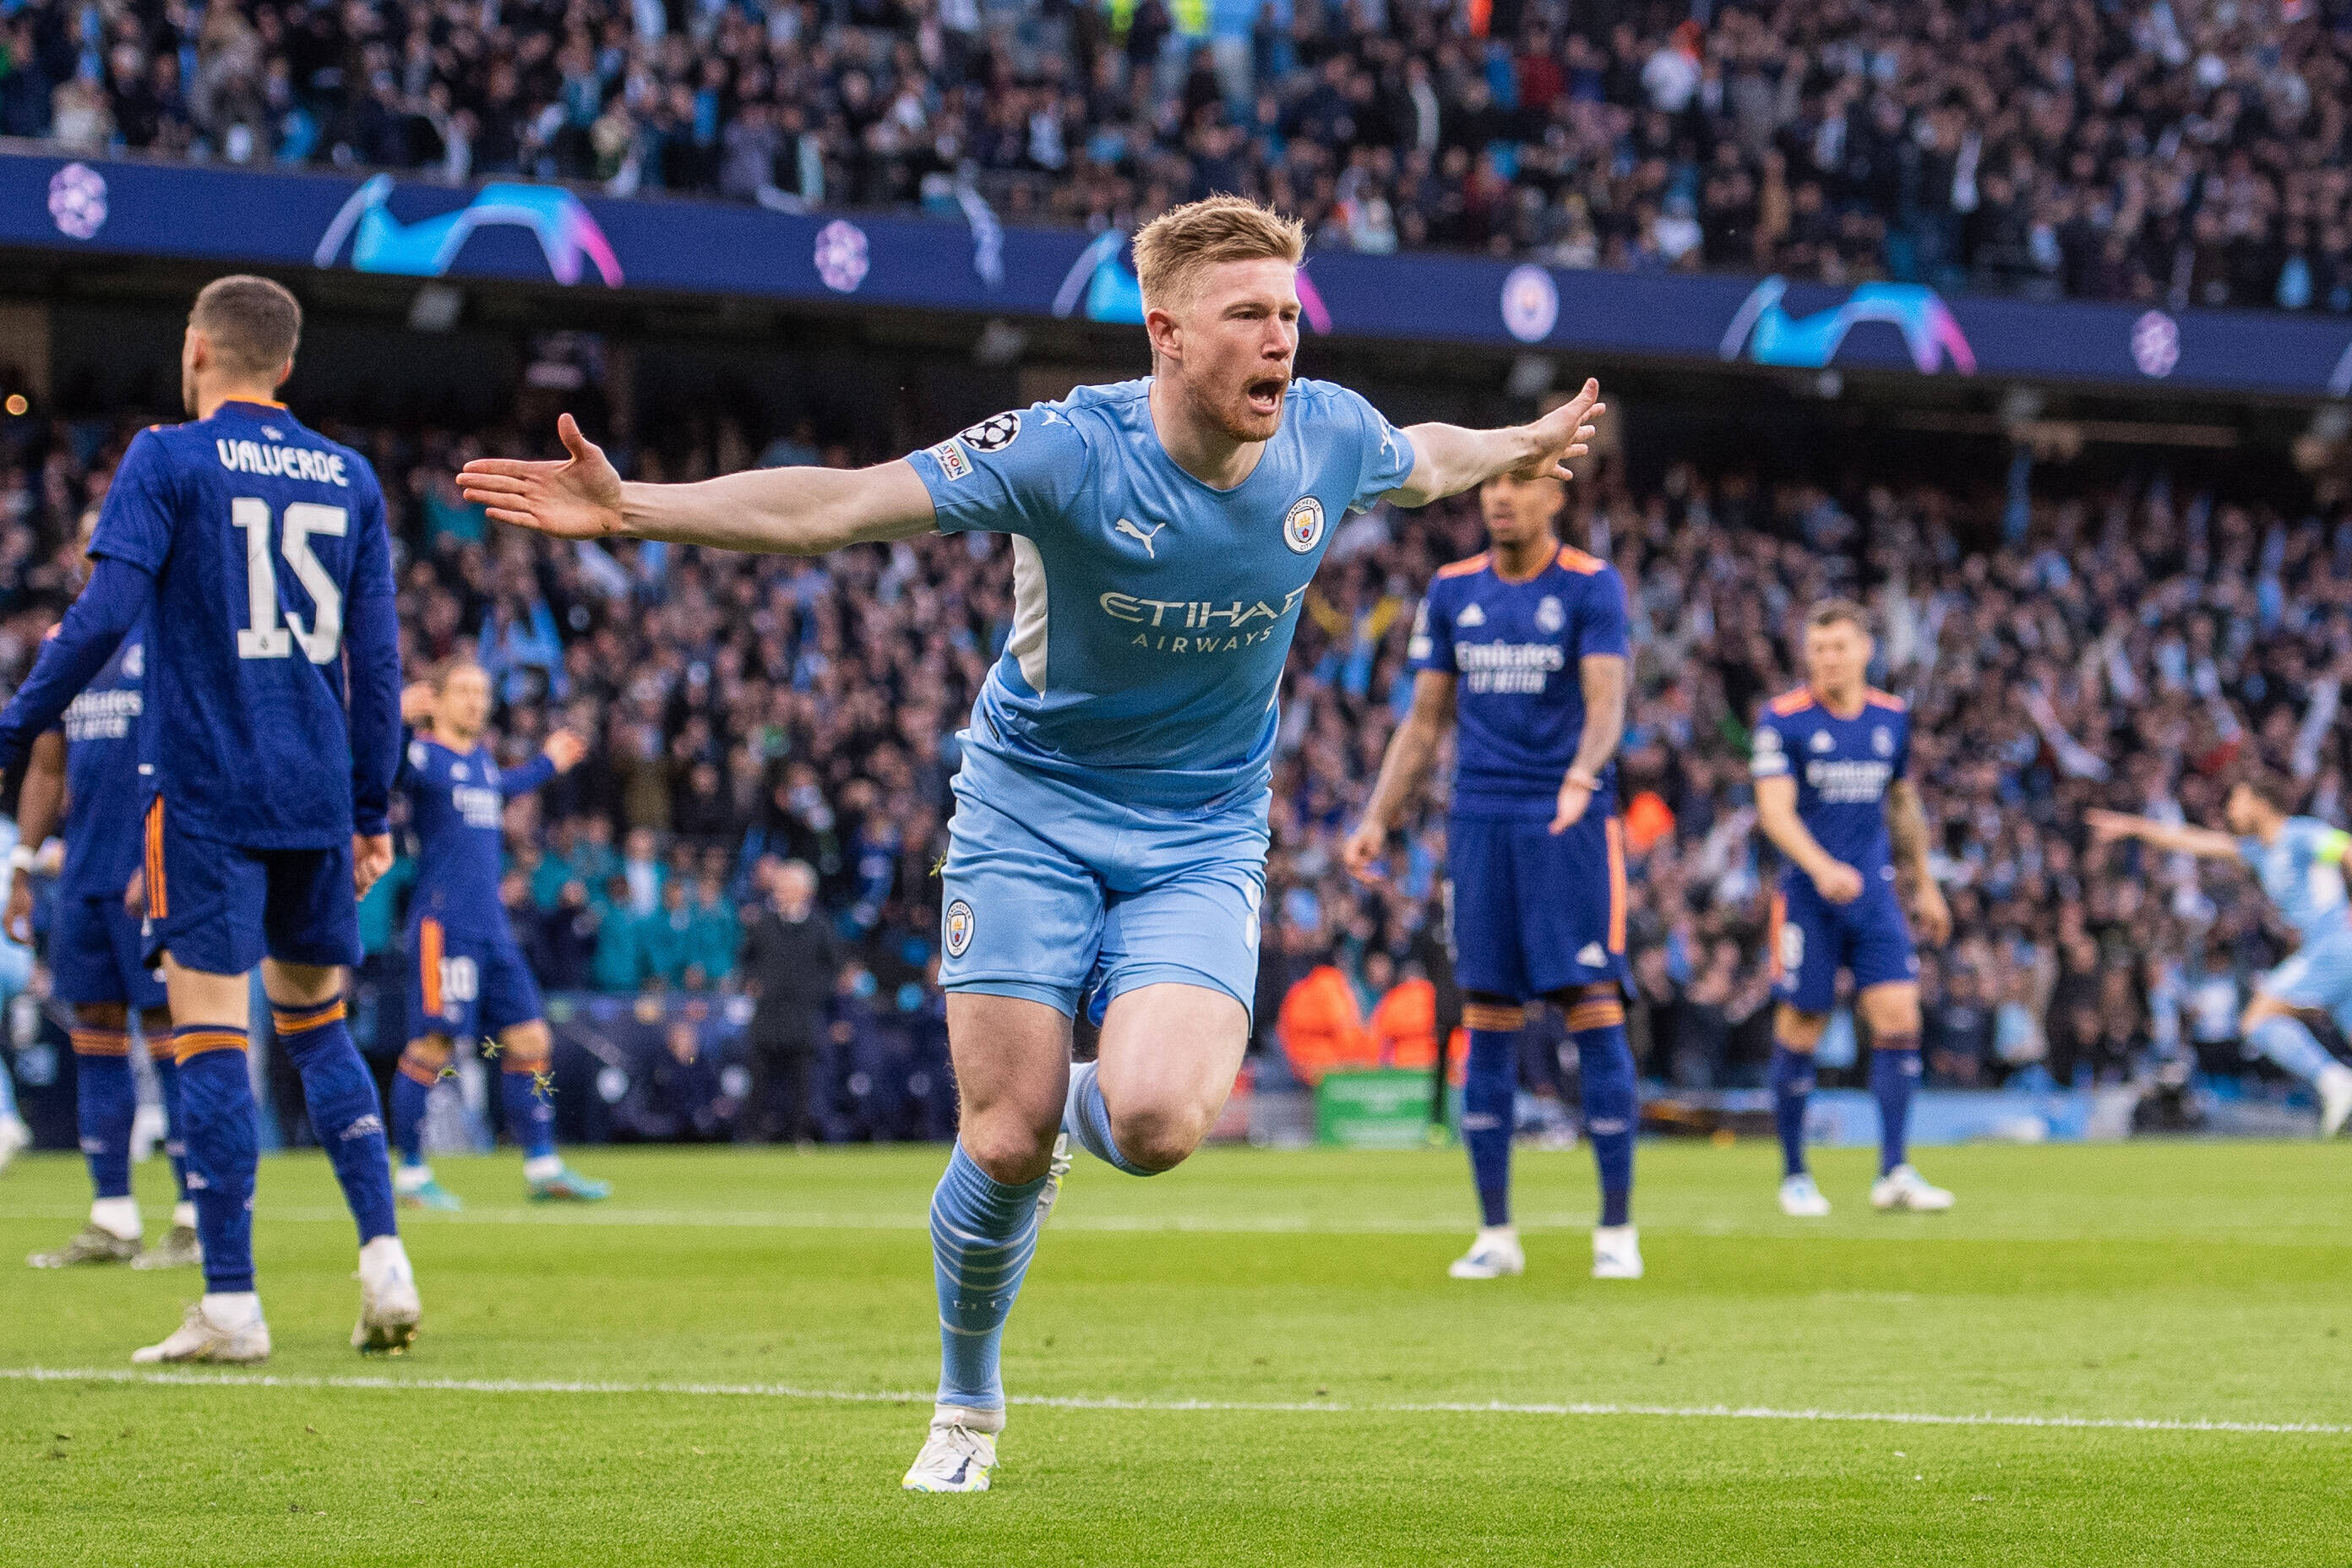 Kevin De Bruyne scored the fastest Champions league semi final goal ever after only 90 seconds